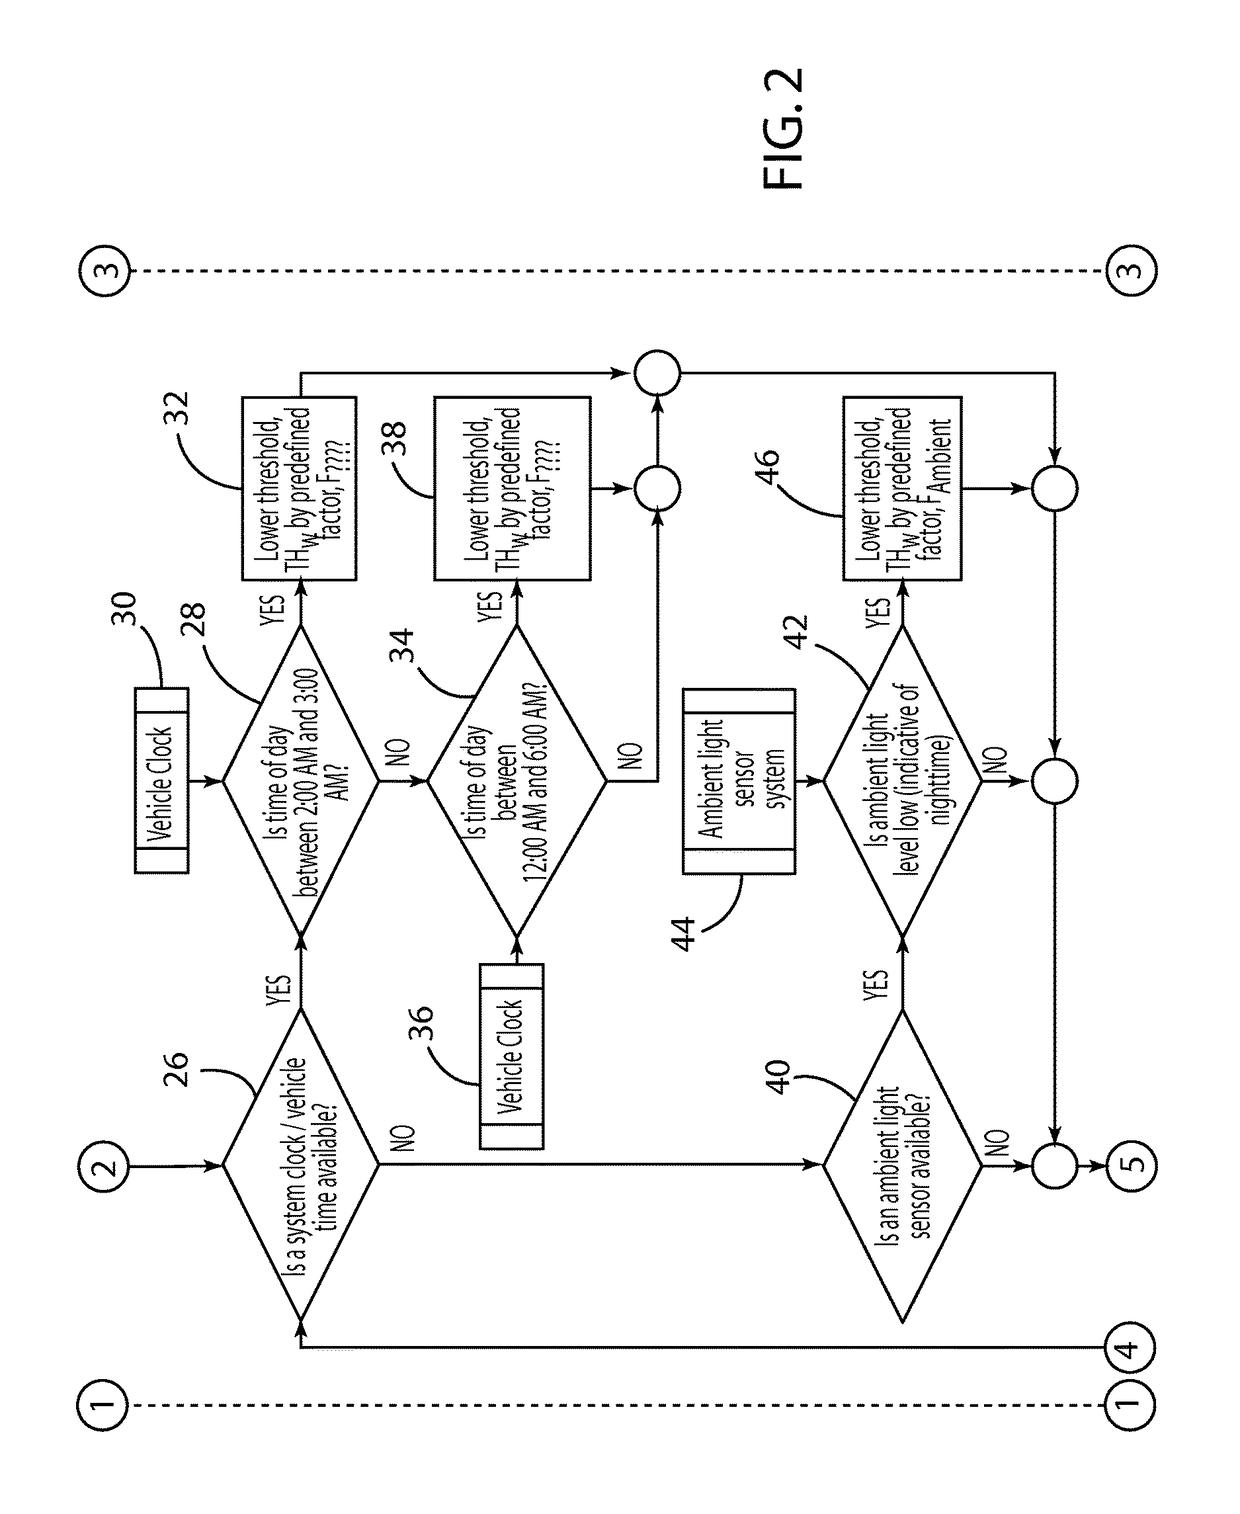 System and method for improving vehicle wrong-way detection